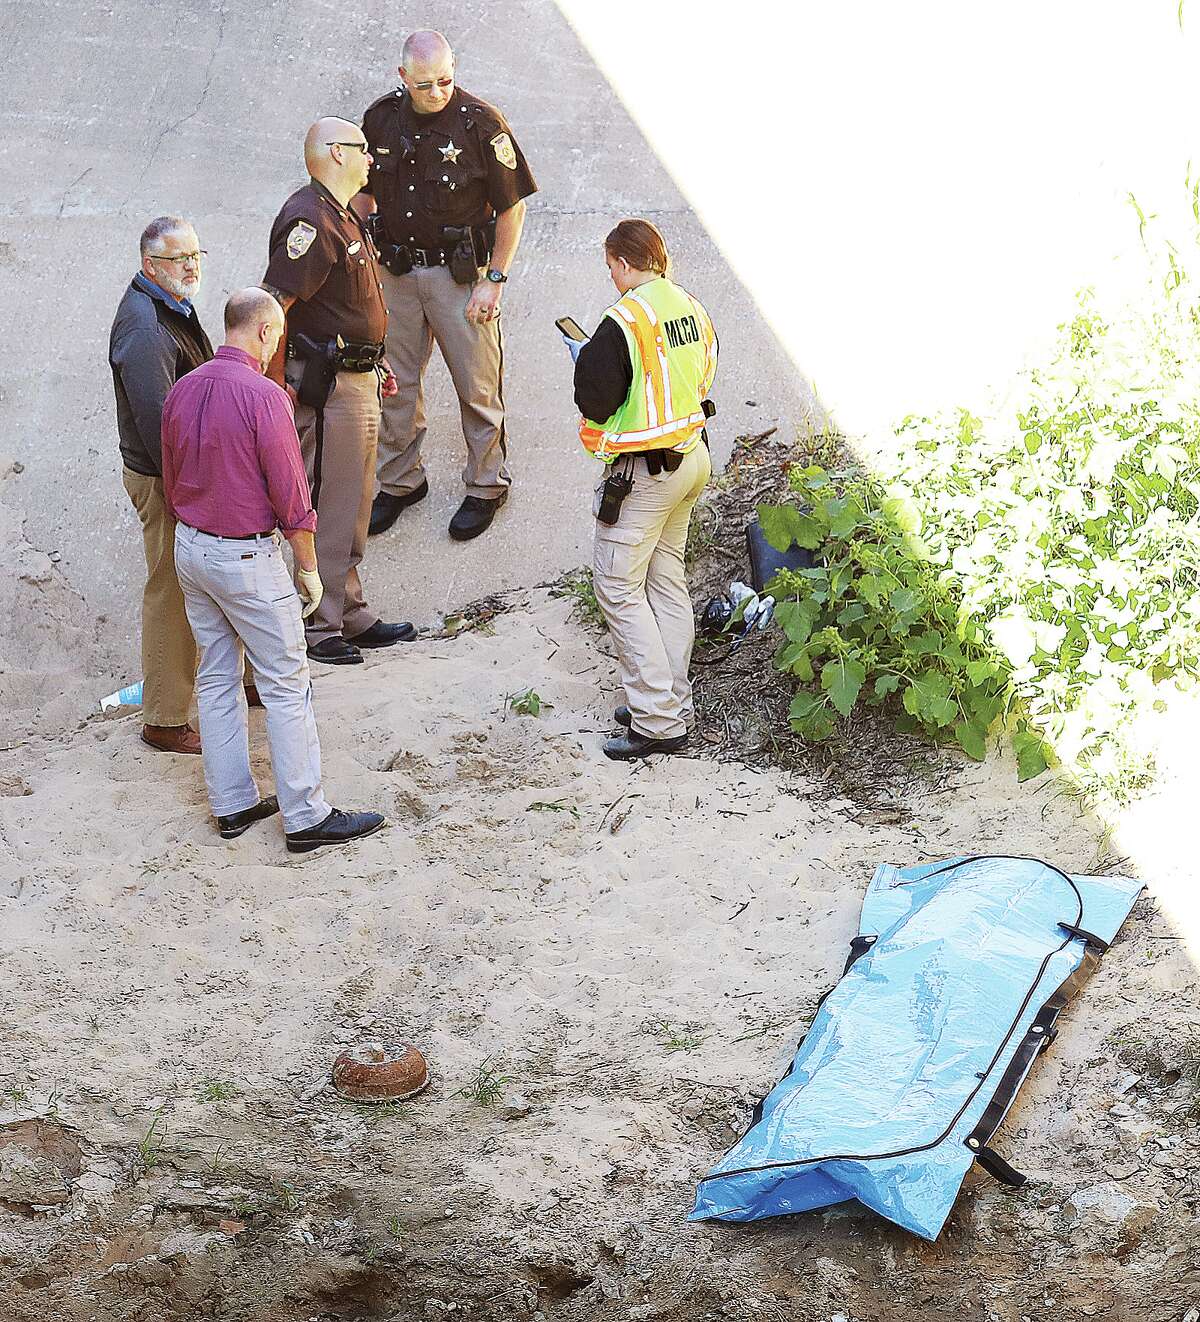 John Badman|The Telegraph Madison County deputies and a Madison County Coroner's Office investigator prepare to retrieve a deceased person found in Cottage Hills Saturday.